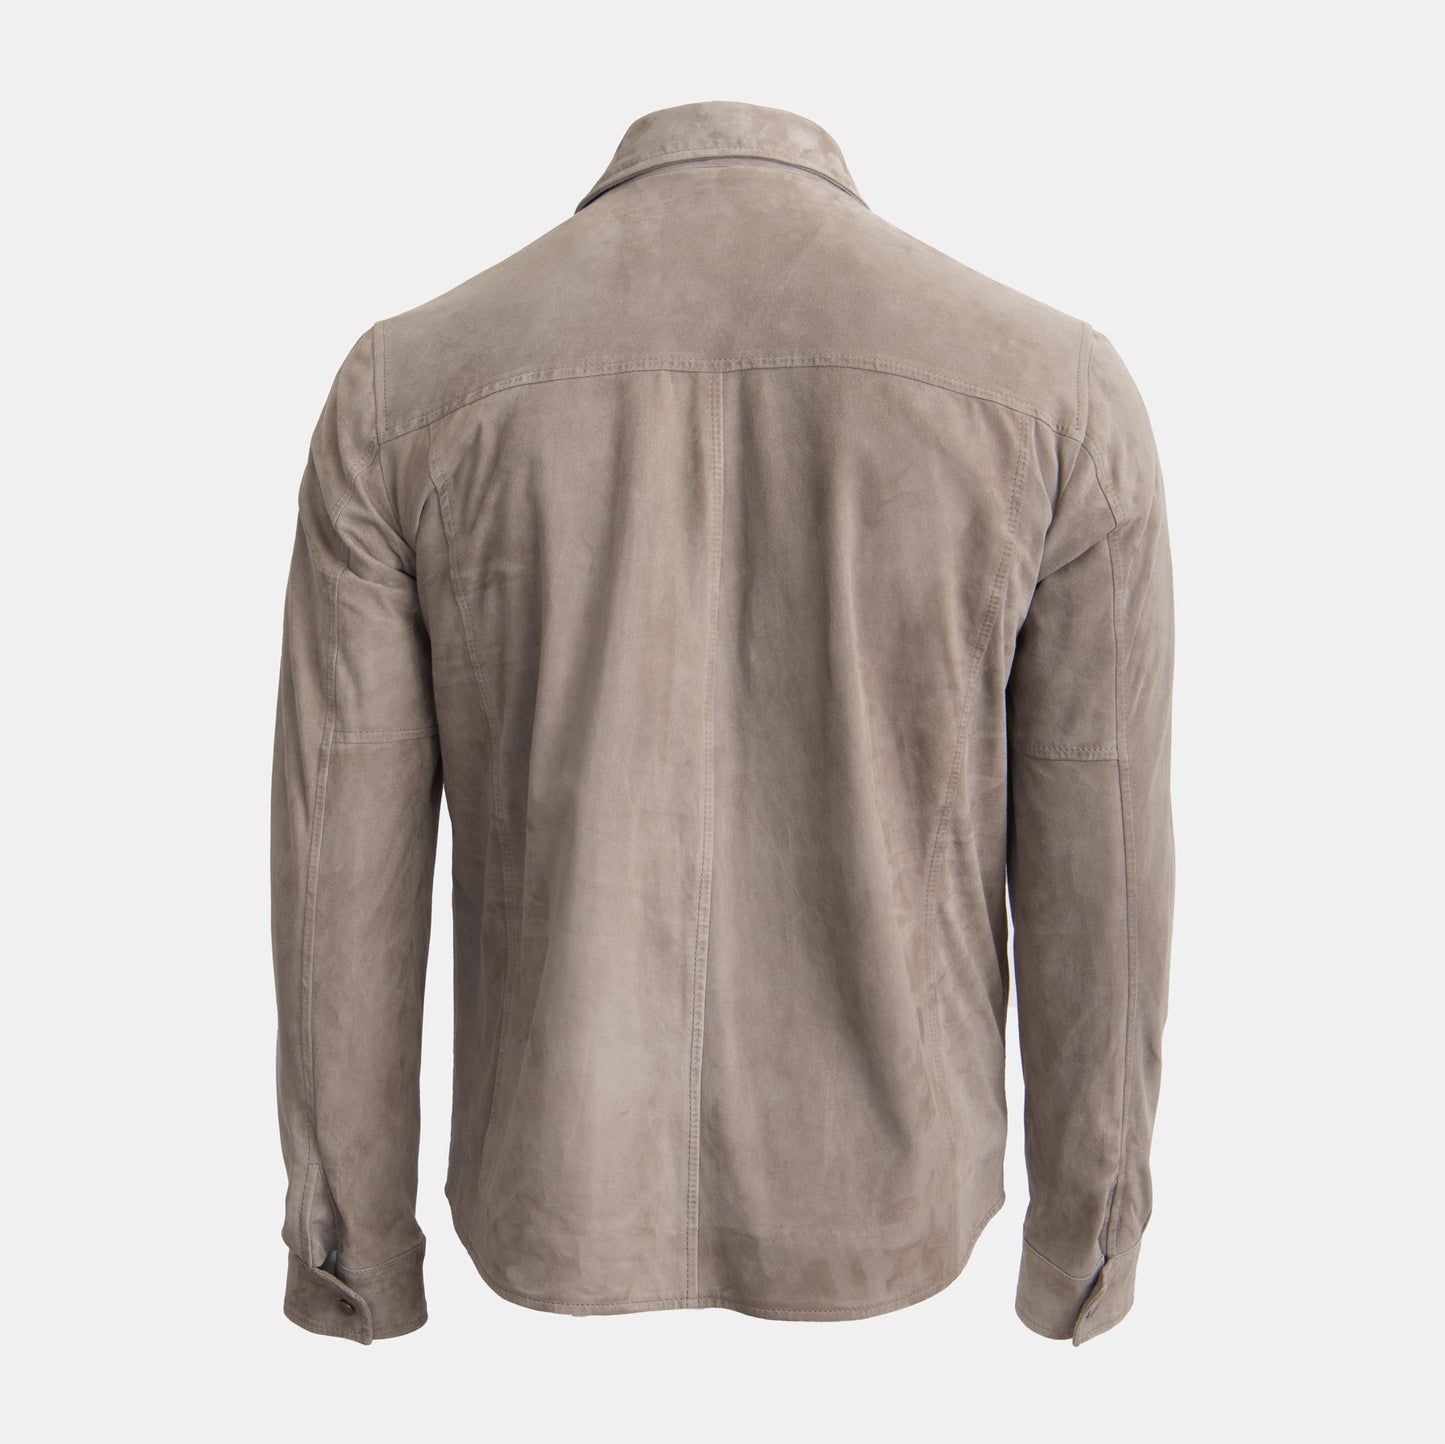 Ravazzolo - Grey Suede Leather Snap Shirt Jacket